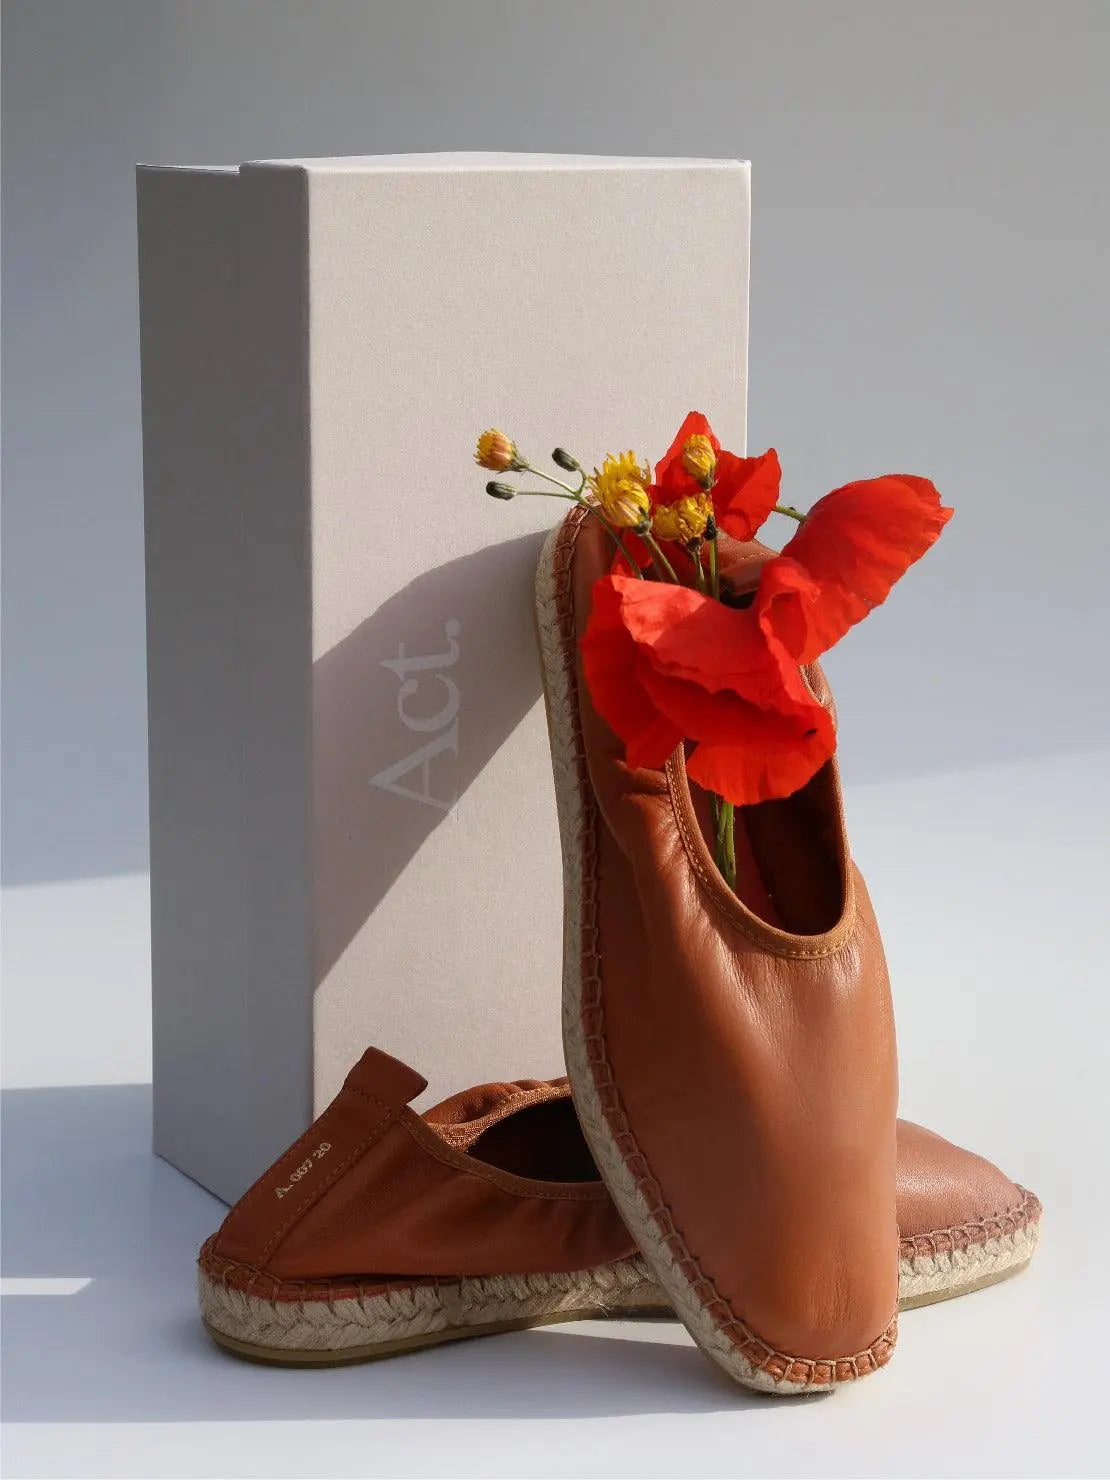 A pair of Edvard Brown Leather Espadrilles - Act Series with woven soles, one upright and the other resting on its side, next to a branded Act Series box. Red poppy flowers and yellow blossoms peek out from the upright shoe. Light background with soft shadows, perfect for your next visit to a chic Barcelona store like Bassalstore.